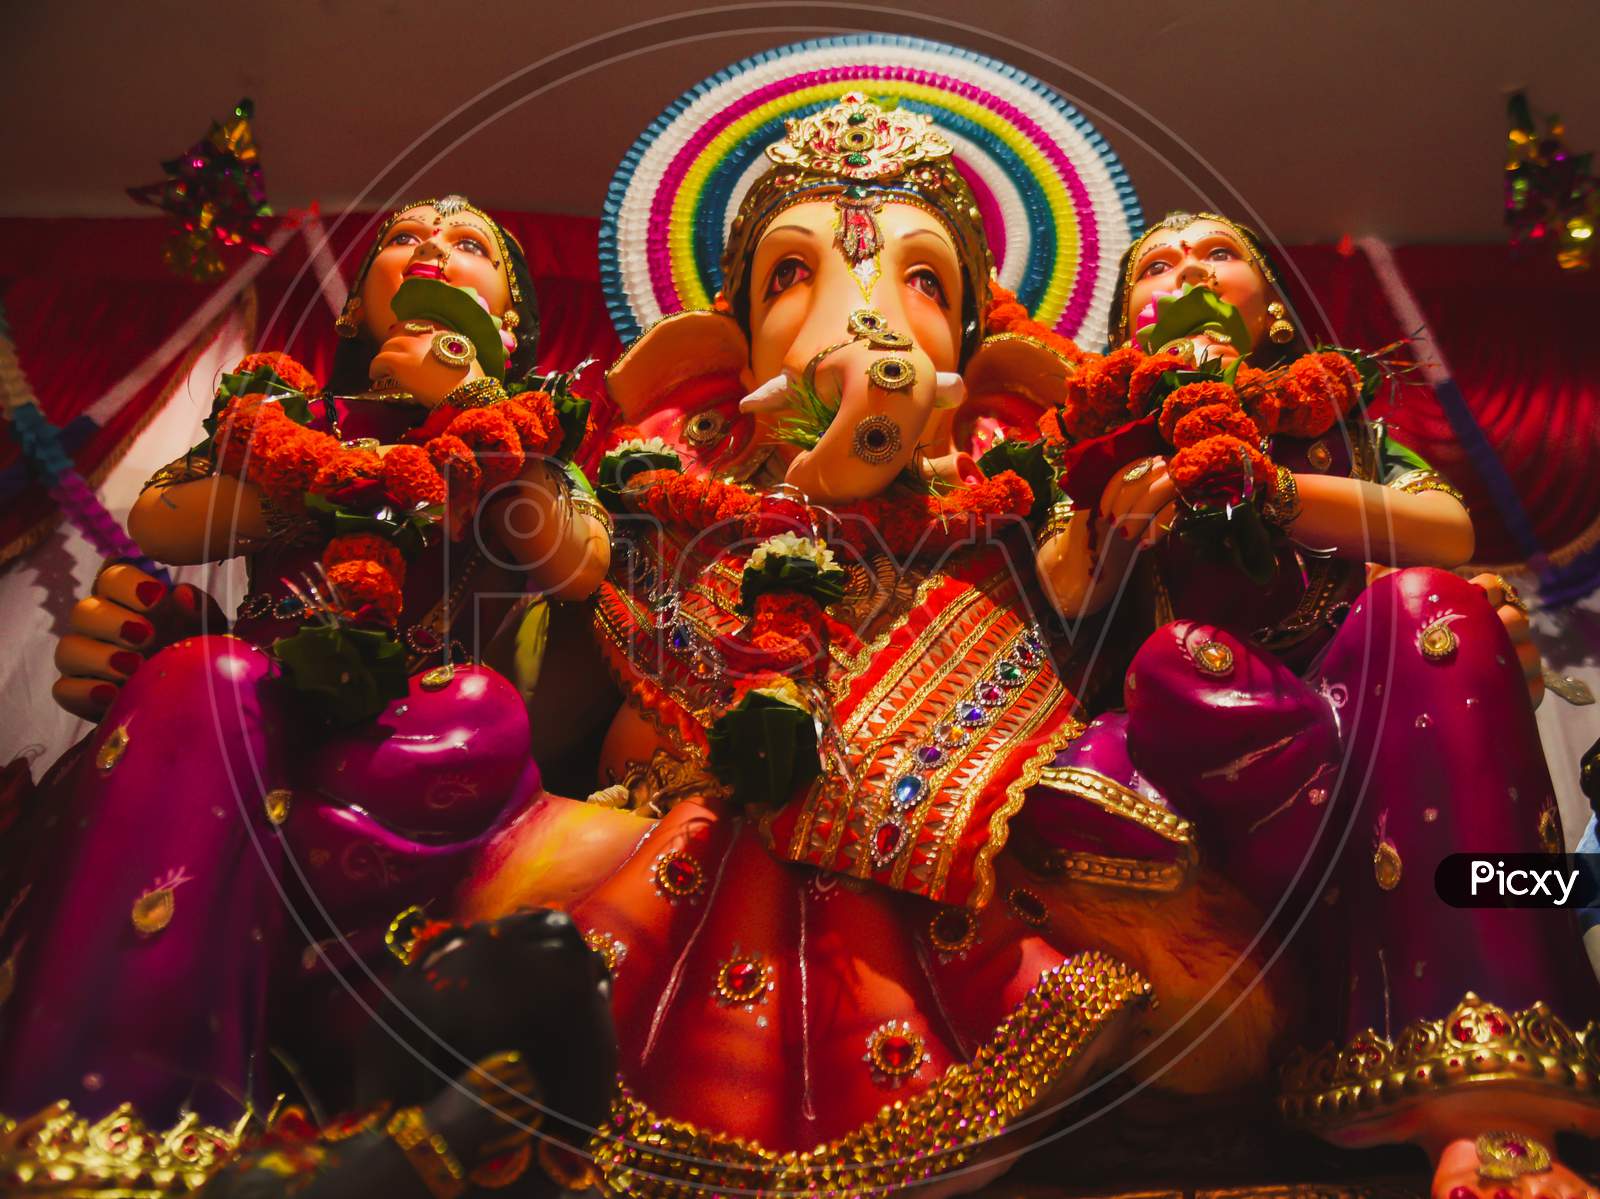 Colorful idol of lord ganesh in a temple